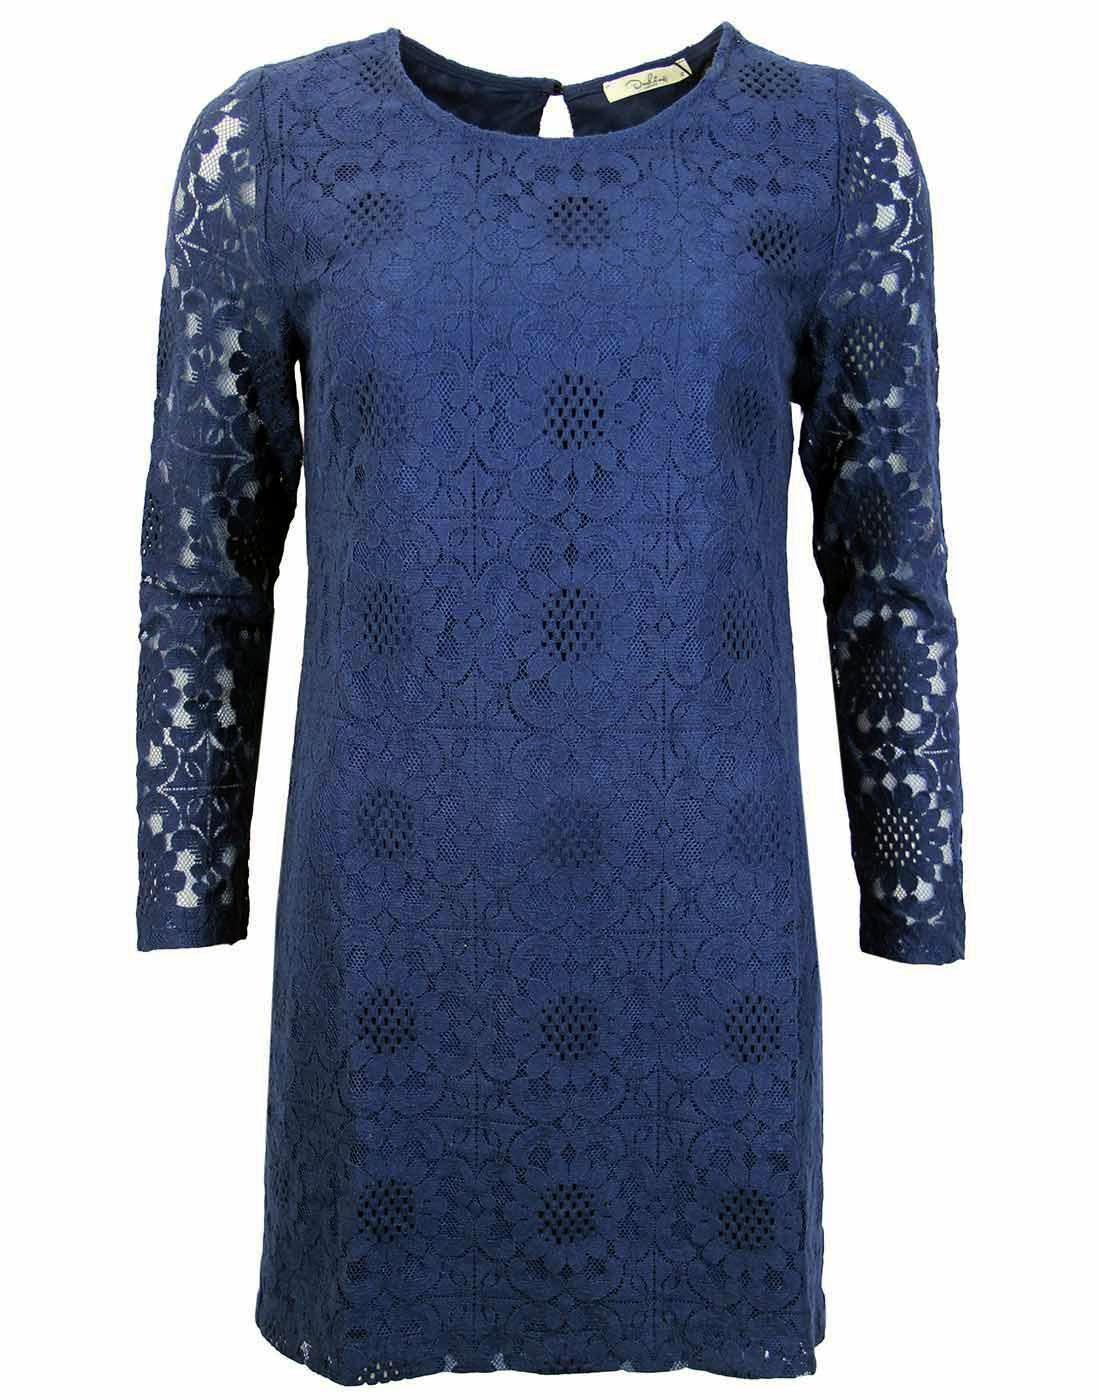 Erin DARLING Retro 60's Floral Lace Tunic Dress N